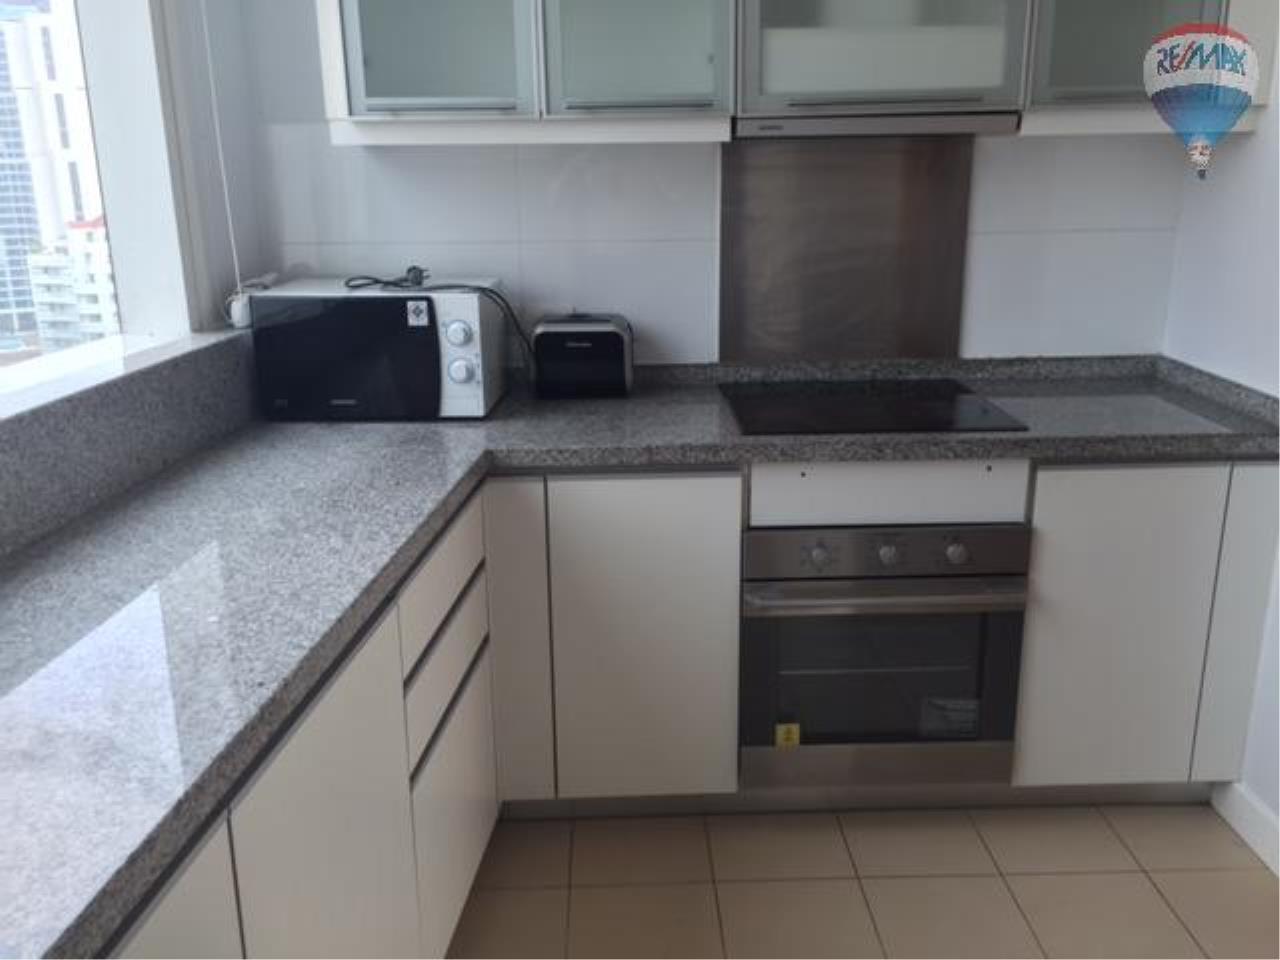 RE/MAX Properties Agency's 3 Bedroom 146 q.m. for Rent at Millennium Residence 2